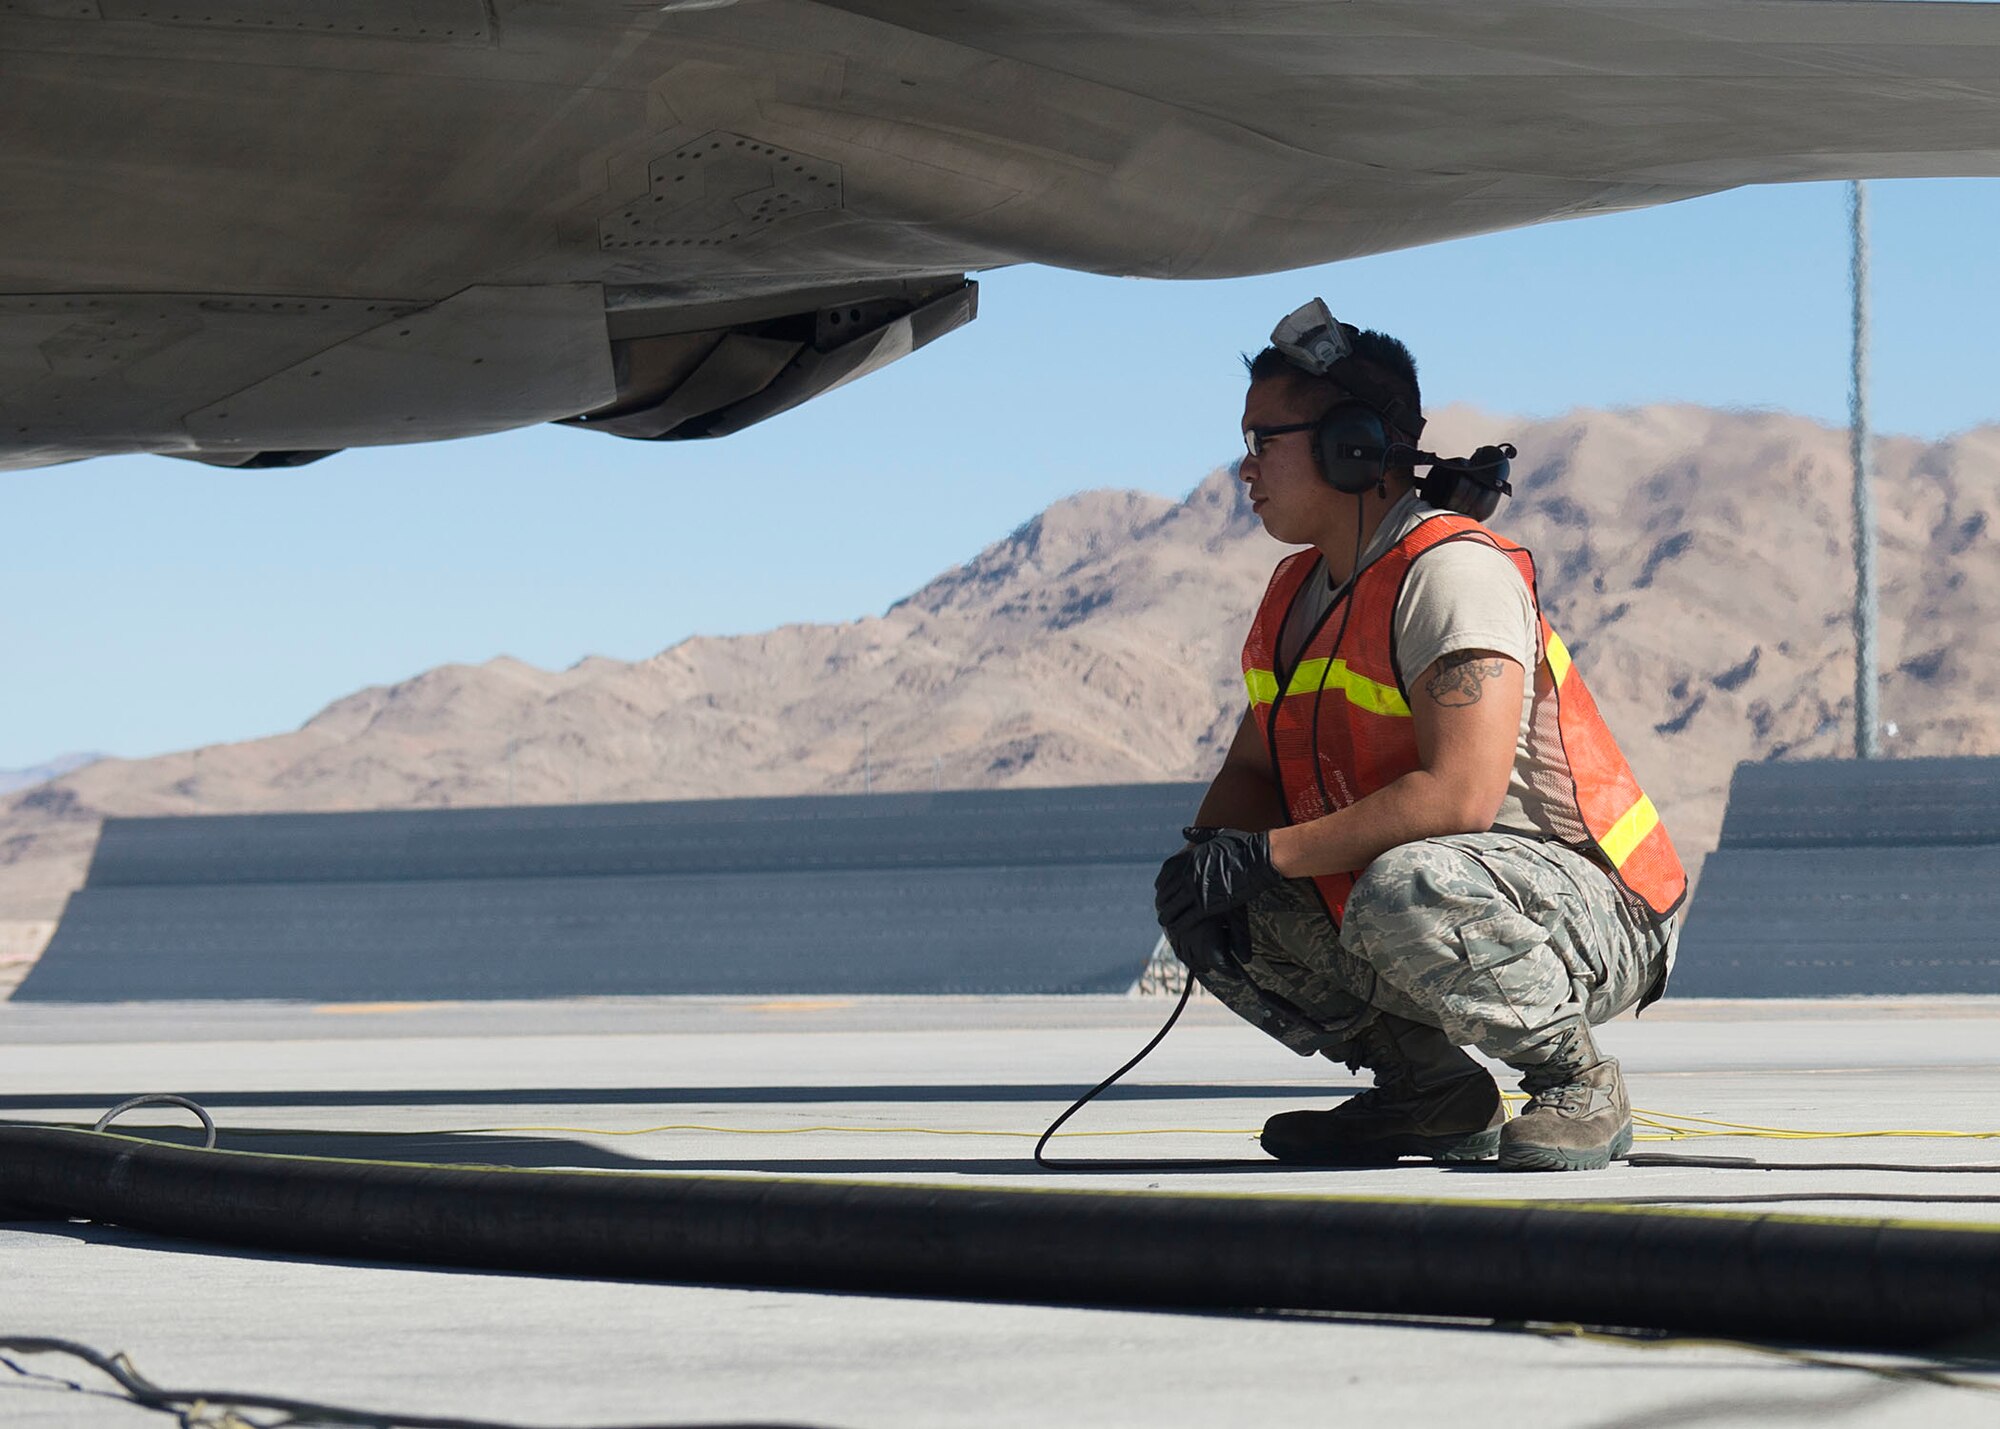 Senior Airman Johnny Cruz, 57th Aircraft Maintenance Squadron Raptor Aircraft Maintenance Unit assistant dedicated crew chief, watches as a jet gets refueled at Nellis Air Force Base, Nov. 7, 2018. Hot-pit refueling has to be done carefully because the jet is still running while simultaneously being refueled. (U.S. Air Force photo by Airman 1st Class Bryan T. Guthrie)